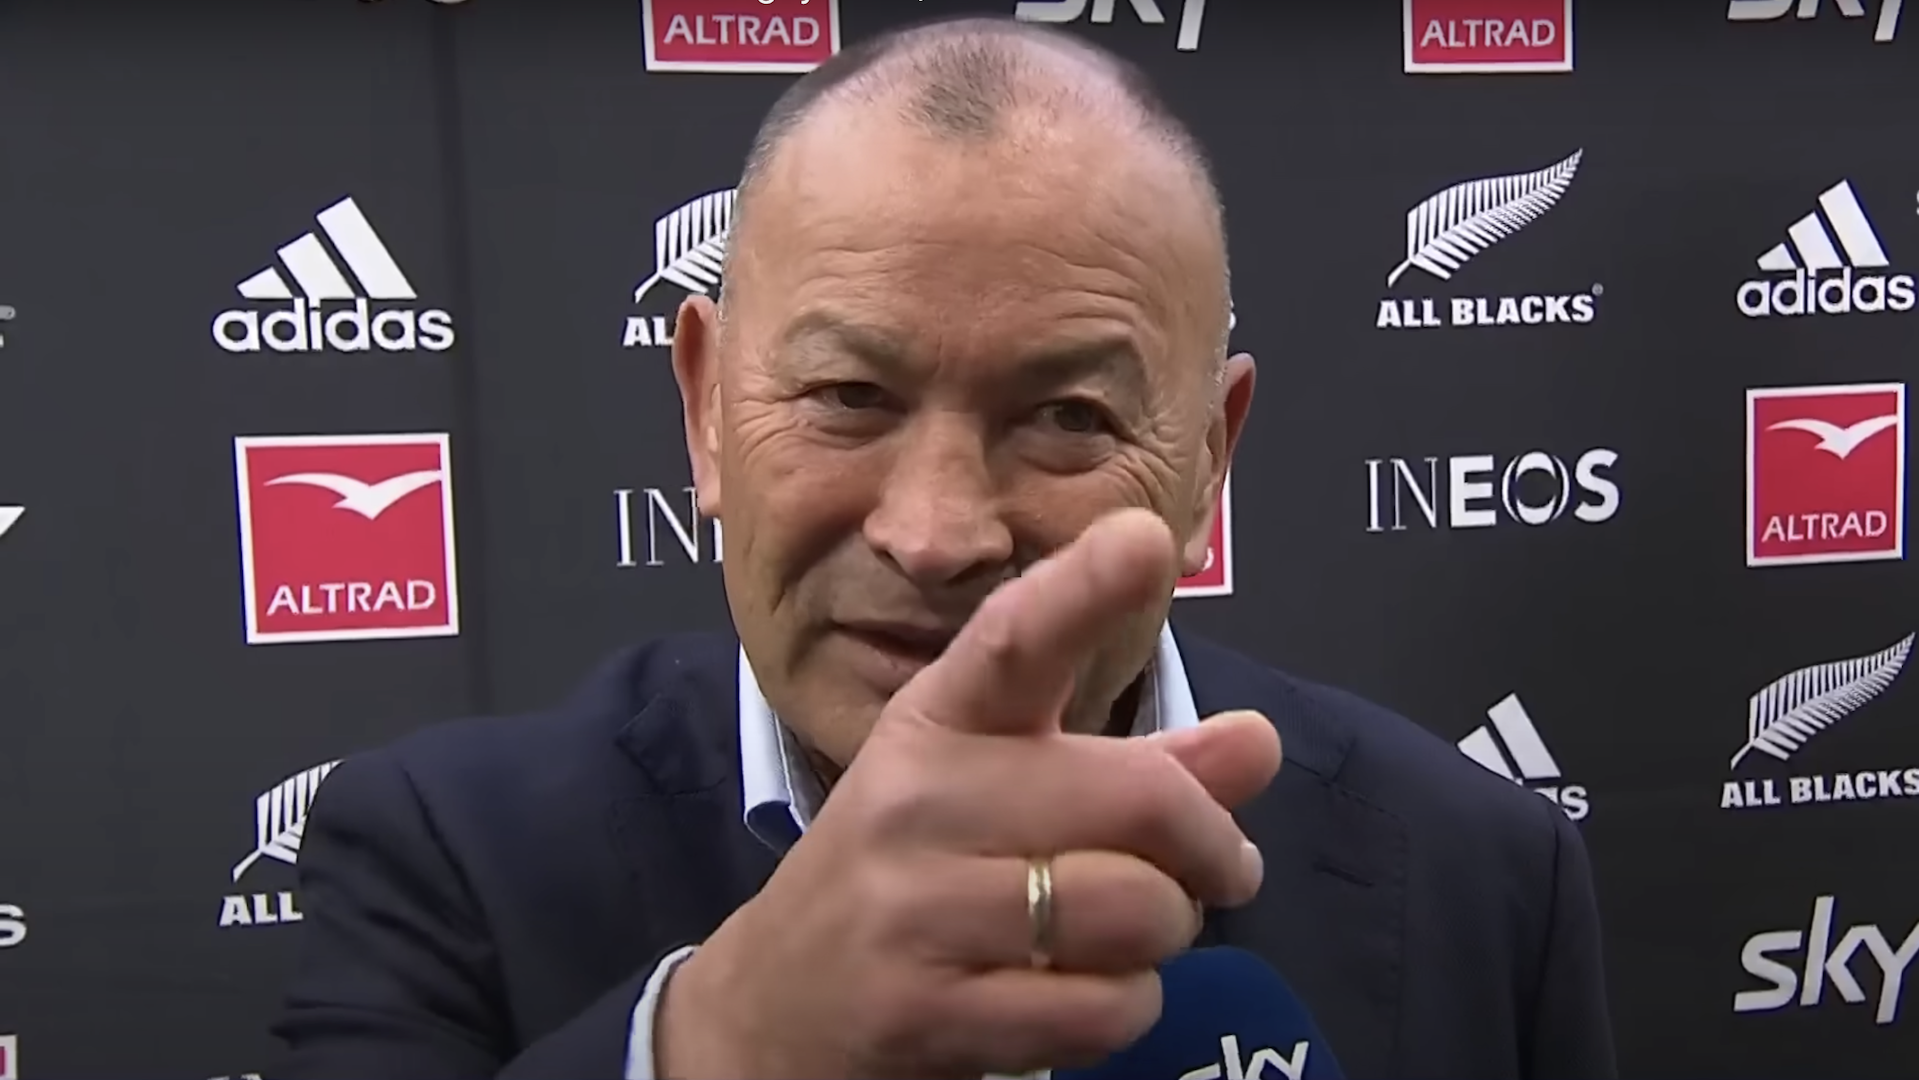 'They're not good supporters': Incensed Eddie Jones clashes with All Blacks fans